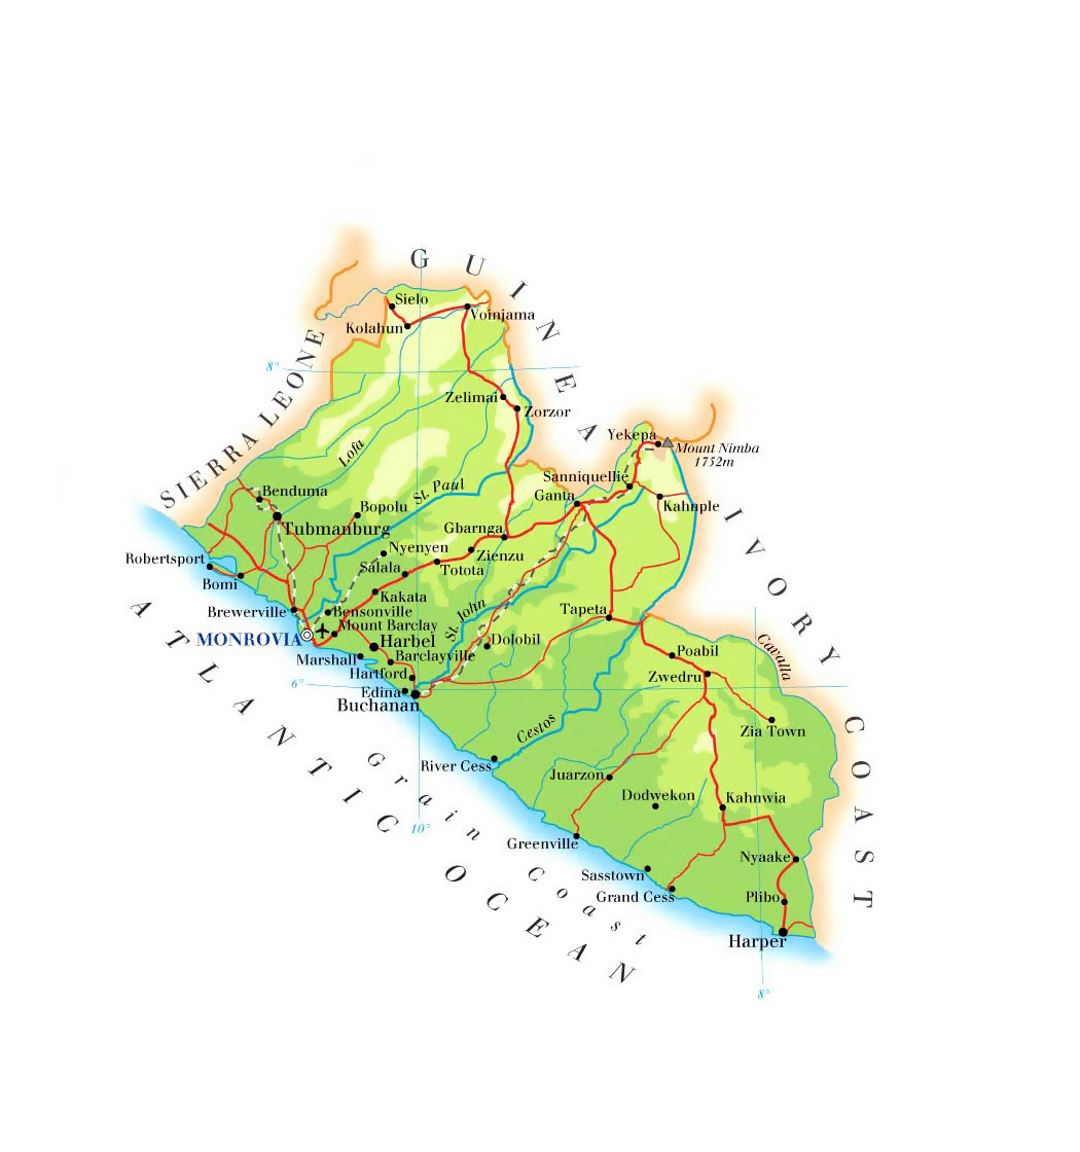 Detailed elevation map of Liberia with roads, cities and airports